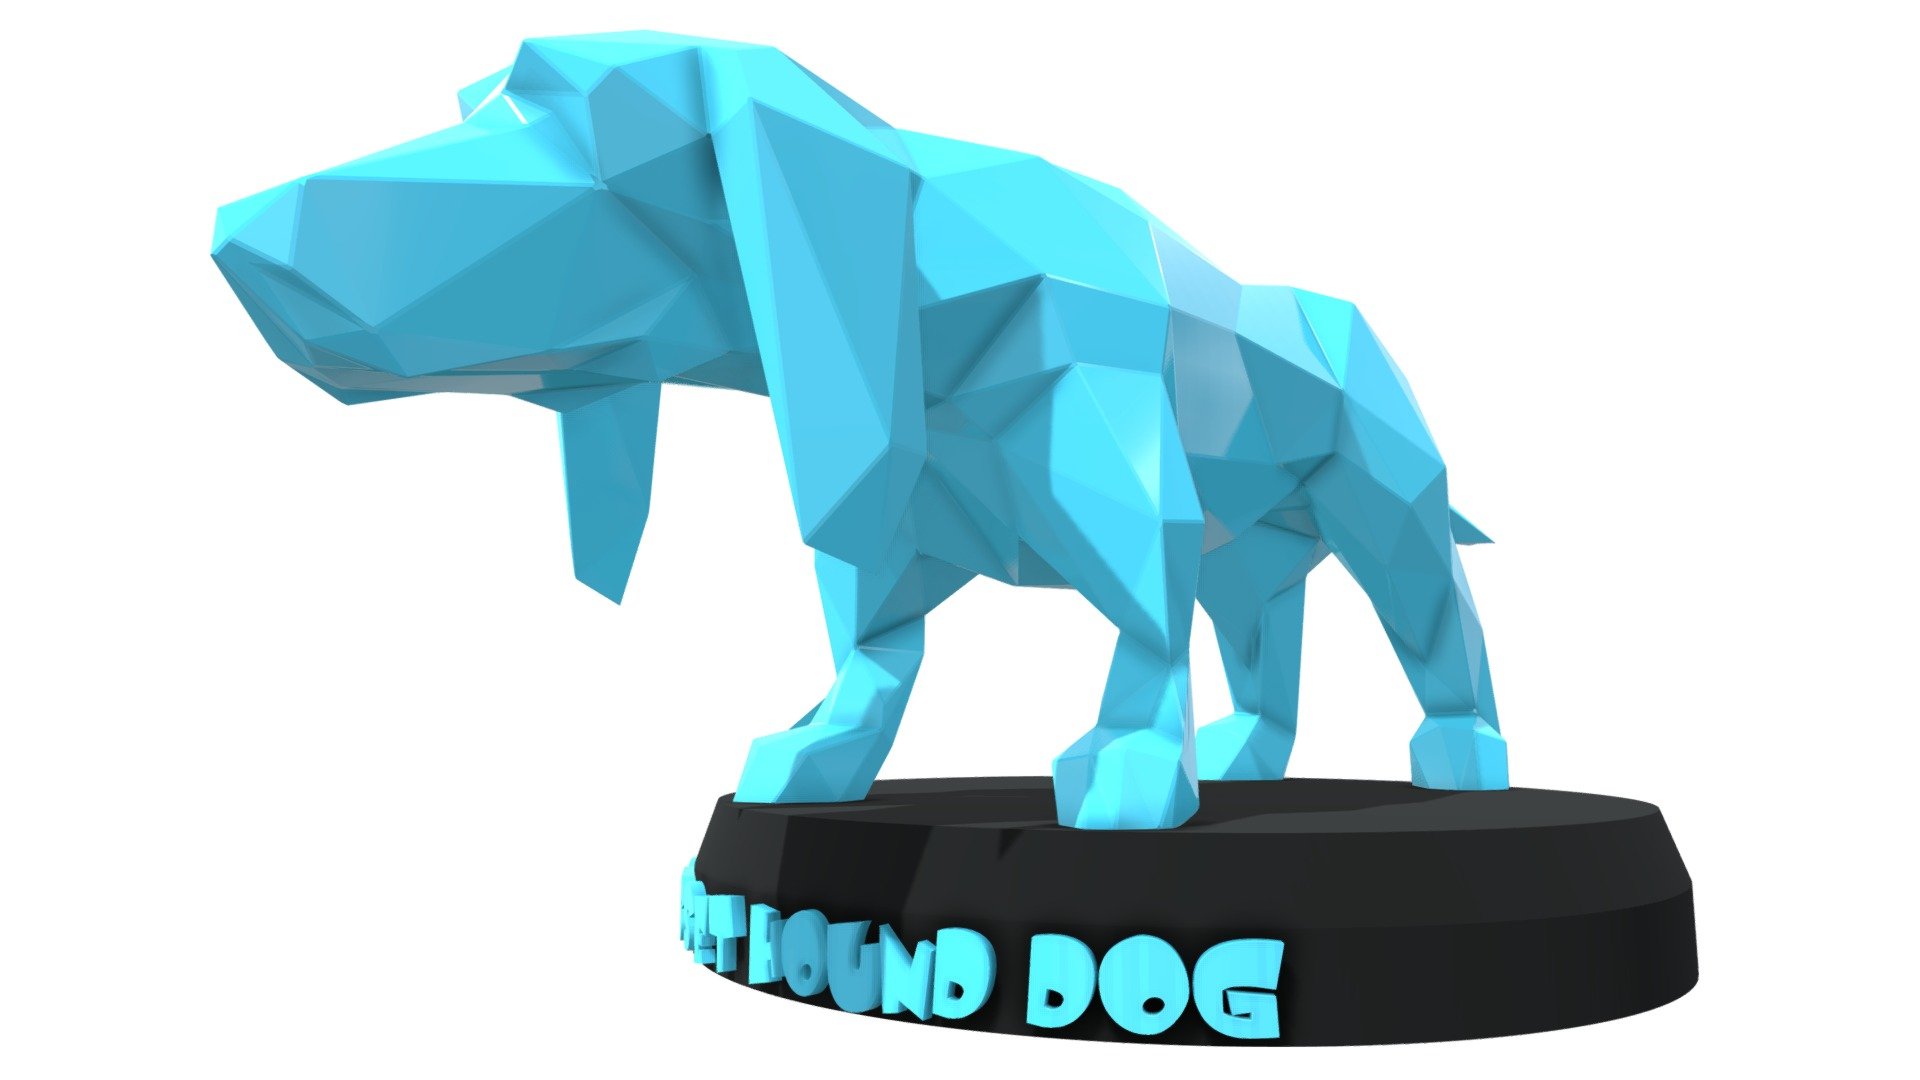 Polygonal 3D Model with Parametric modeling with gold material, make it recommend for :




Basic modeling 

Rigging 

sculpting 

Become Statue

Decorate

3D Print File

Toy

Have fun  :) - Poly Asia Basset Hound Dog - Buy Royalty Free 3D model by Puppy3D 3d model